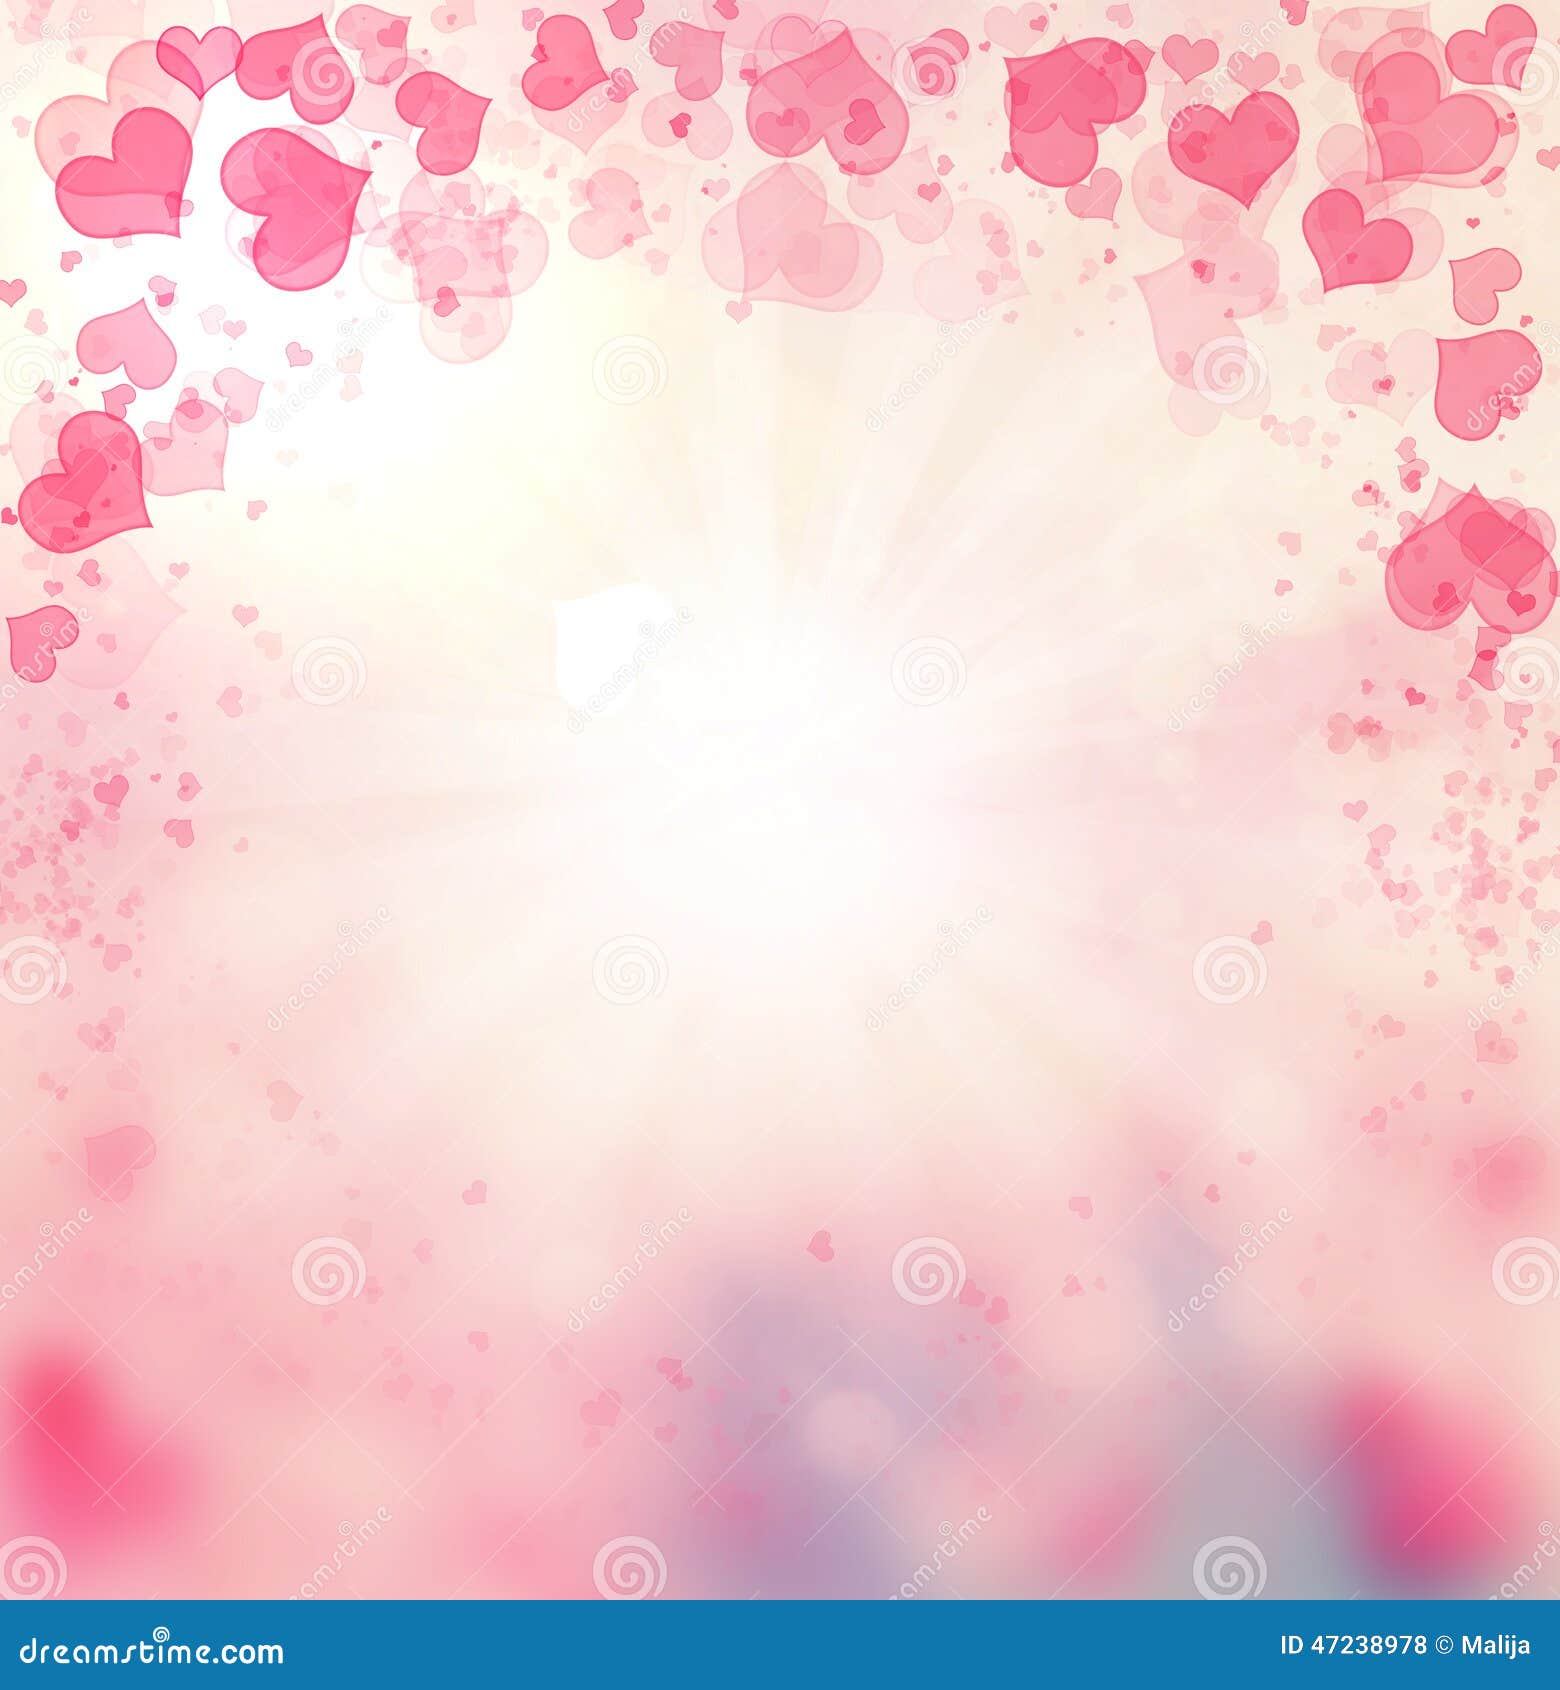 valentine hearts abstract pink background.